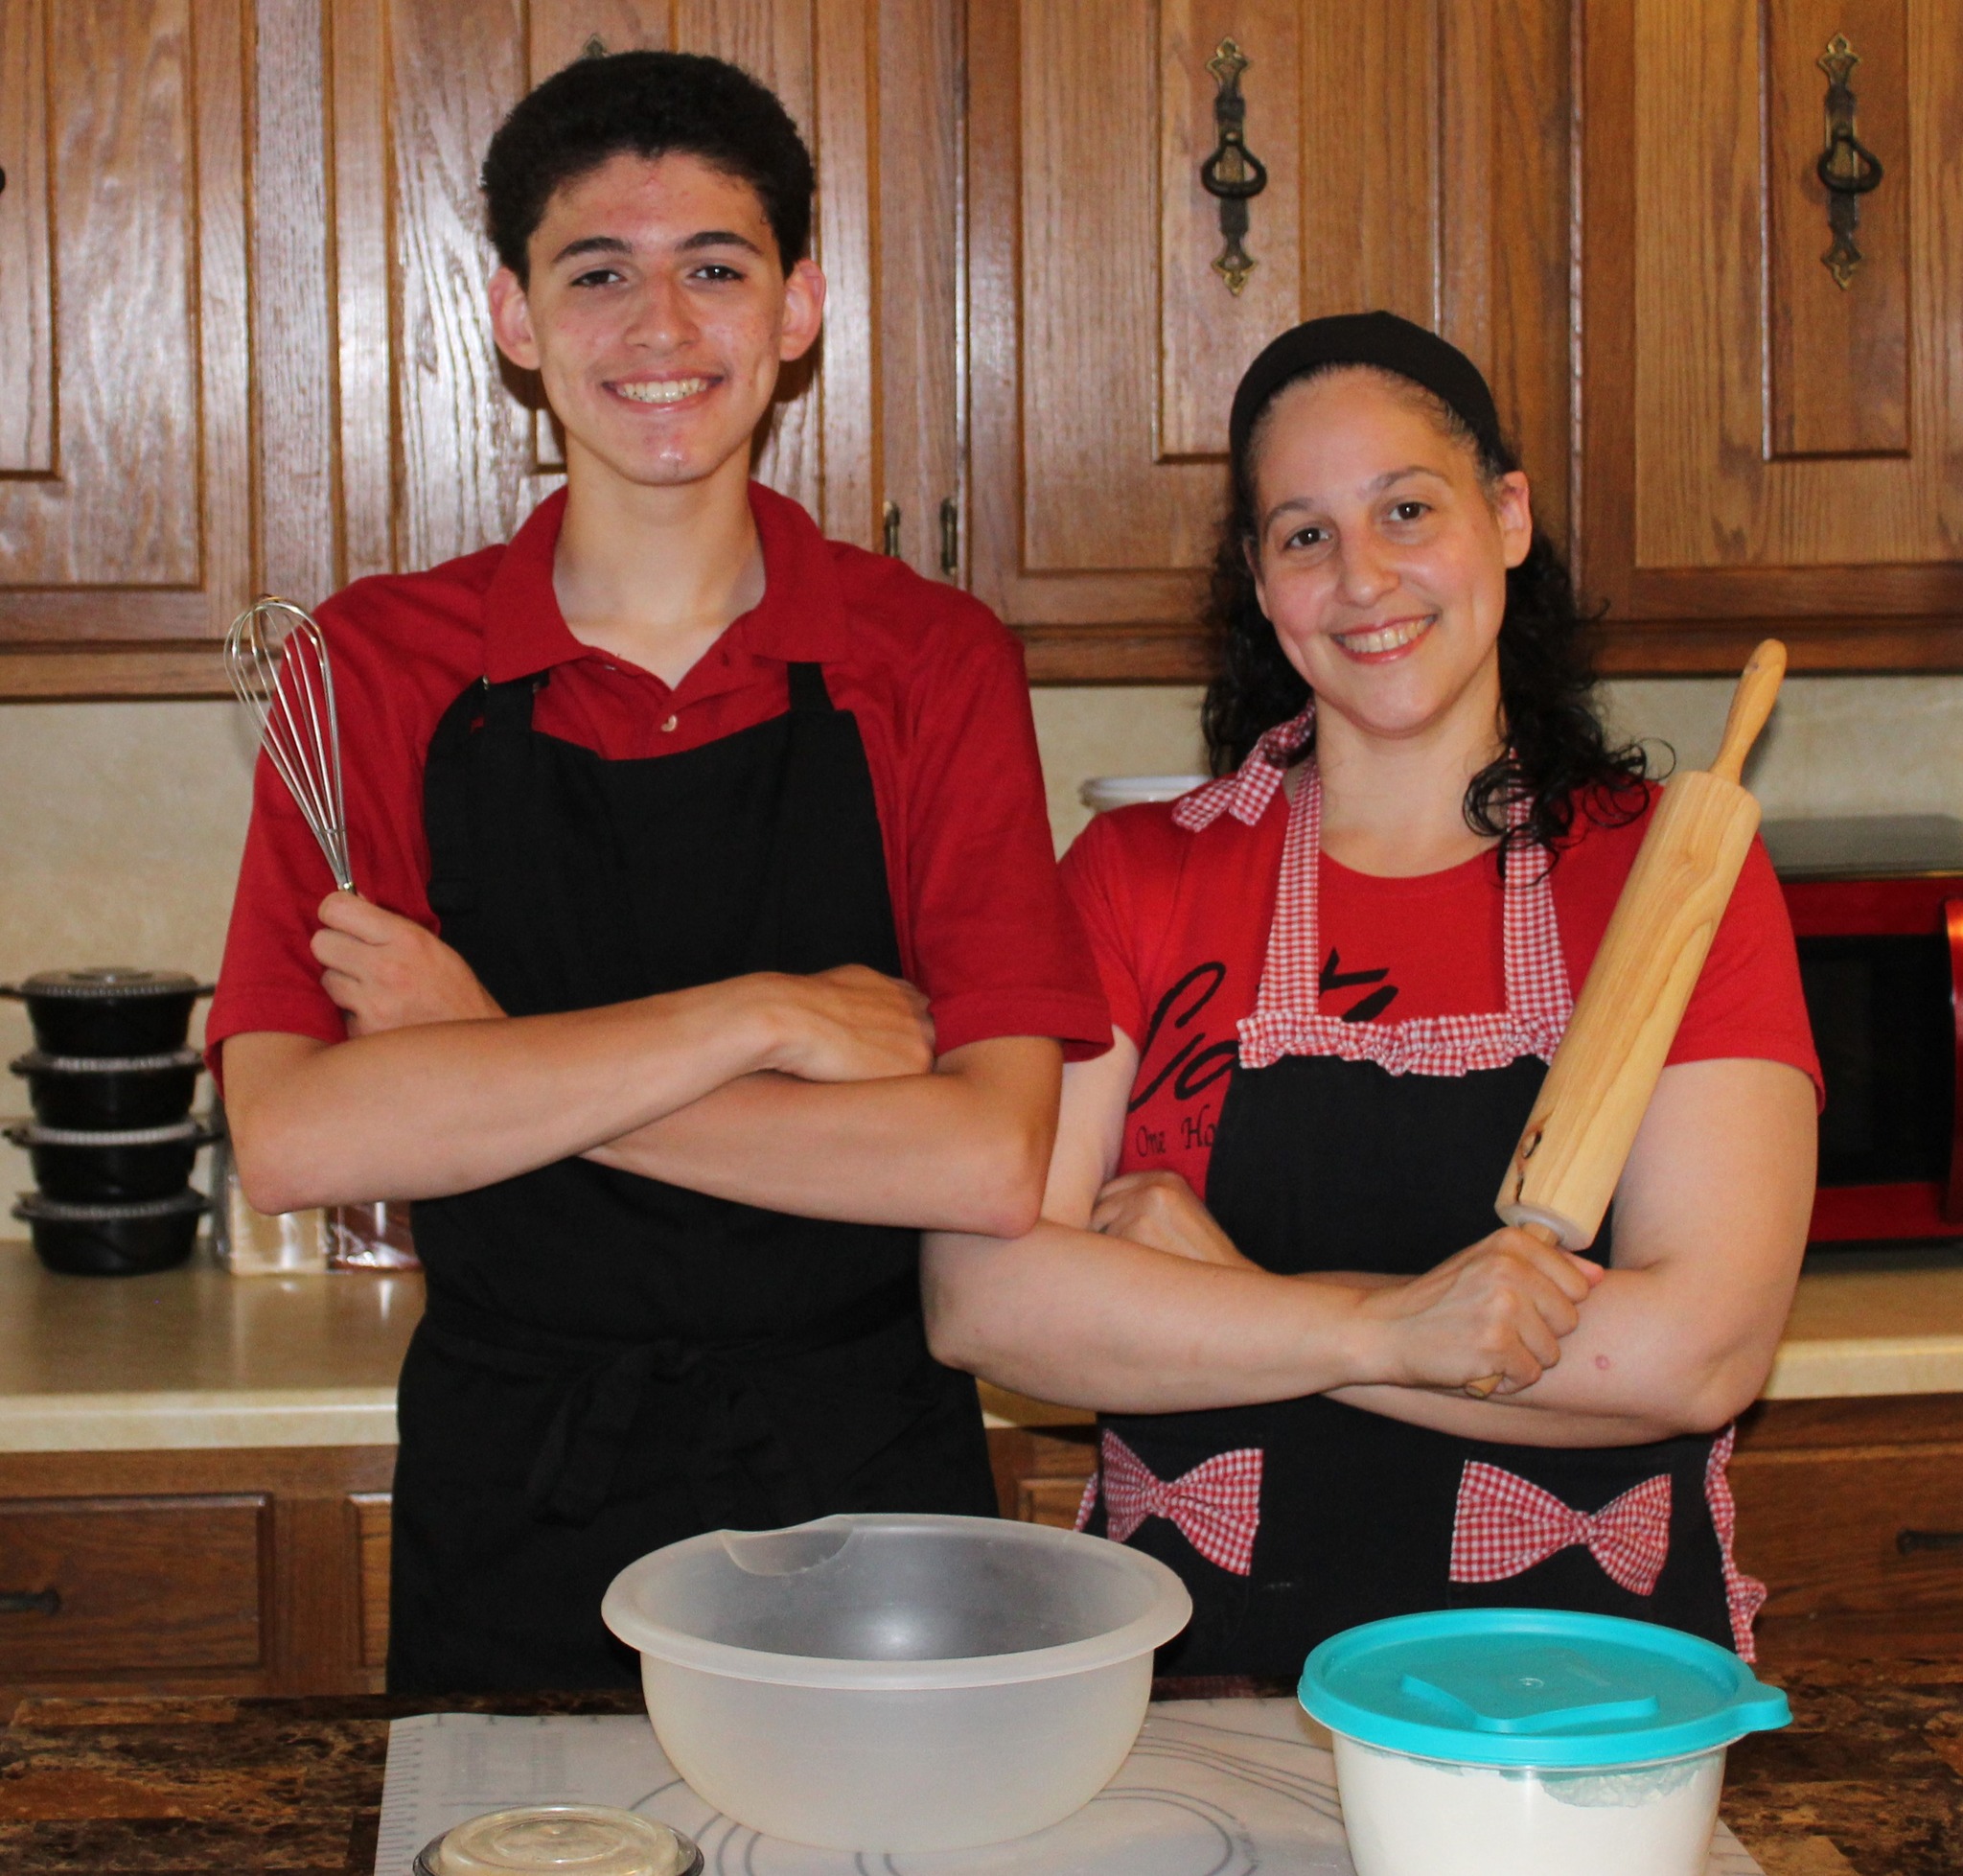 A happy woman holding a rolling pin and a young man armed with a whisk, stand in the kitchen, eager to start cooking or baking.